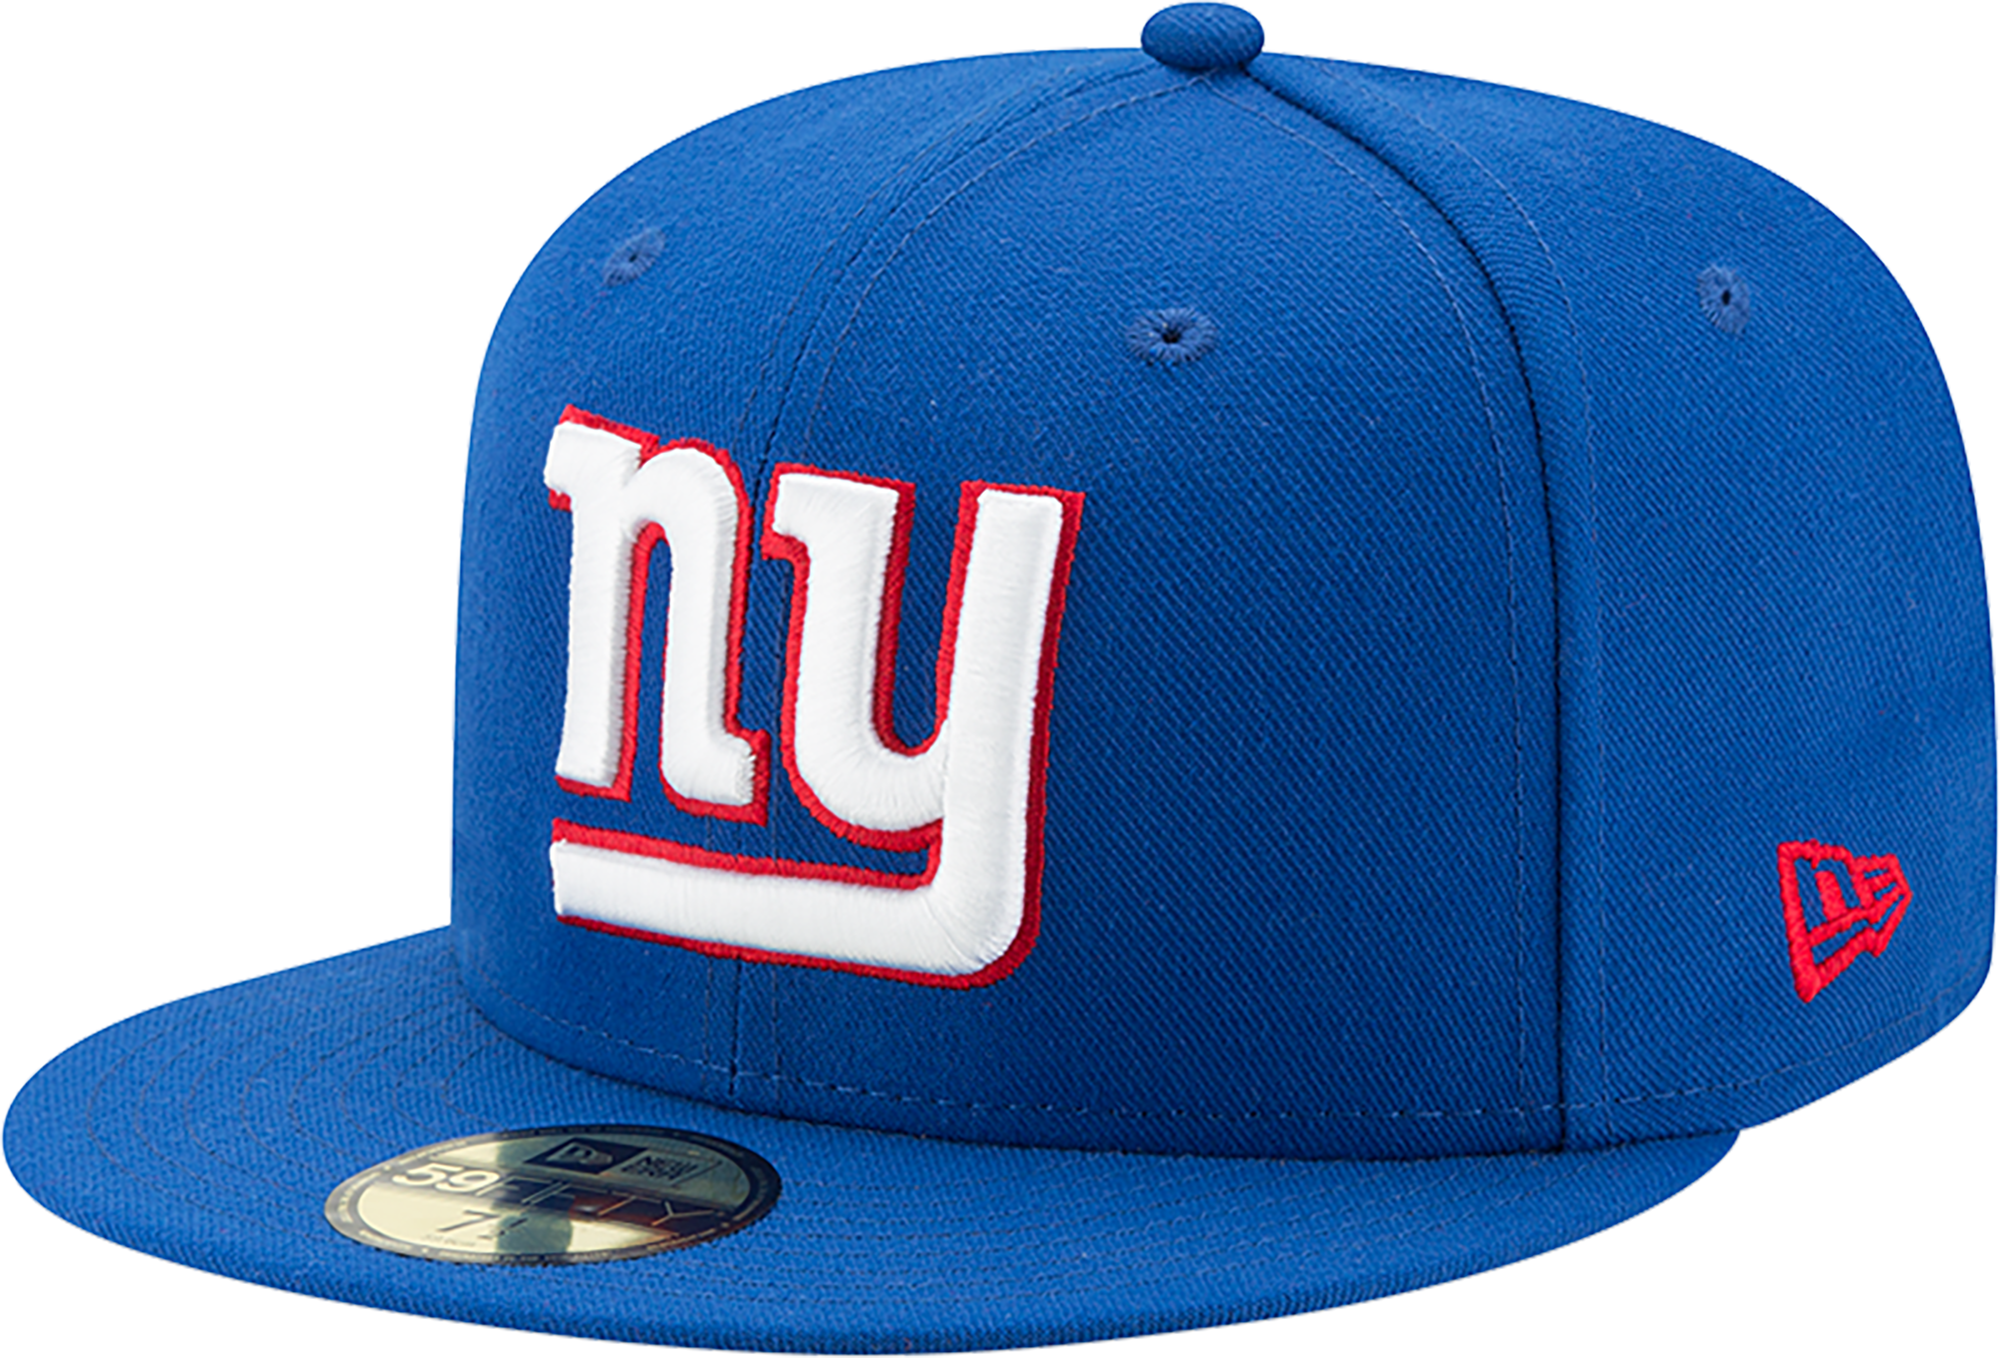 New Era Giants 5950 T/C Fitted Cap